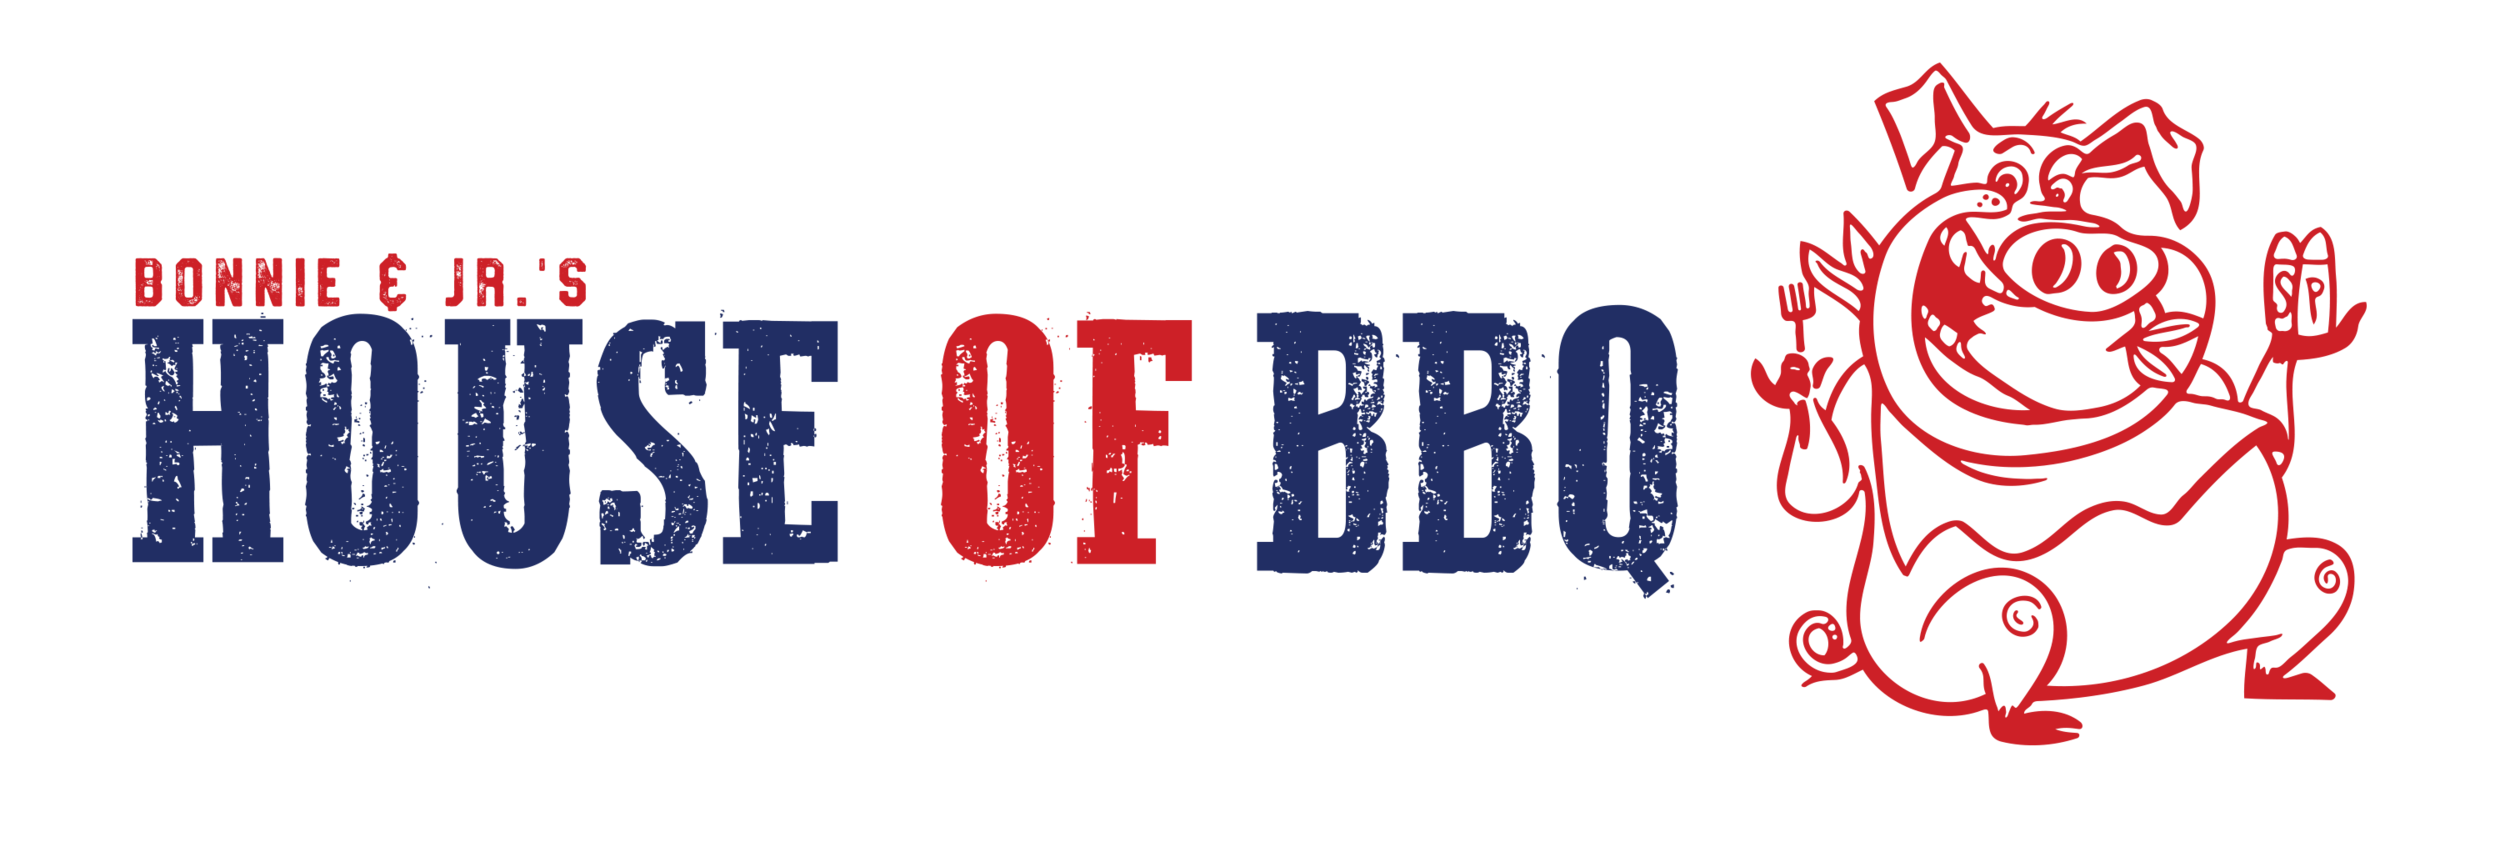 House of BBQ Sauce